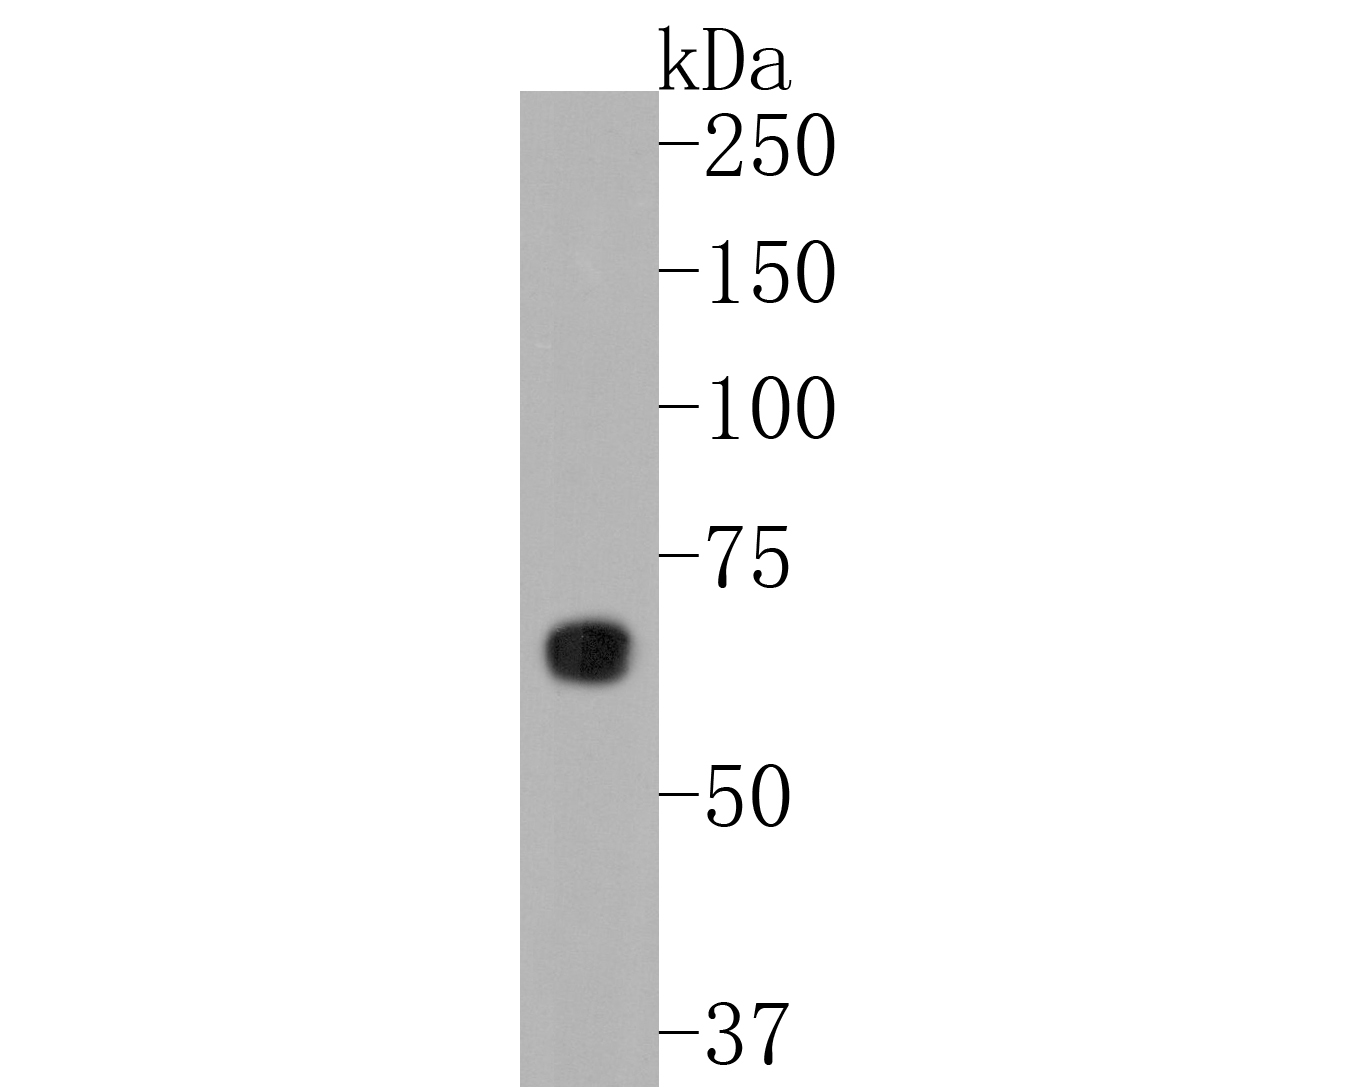 Western blot analysis of Phospho-AMPK alpha 2(S345) on 293 cell lysates. Proteins were transferred to a PVDF membrane and blocked with 5% BSA in PBS for 1 hour at room temperature. The primary antibody (ET1701-37, 1/500) was used in 5% BSA at room temperature for 2 hours. Goat Anti-Rabbit IgG - HRP Secondary Antibody (HA1001) at 1:200,000 dilution was used for 1 hour at room temperature.